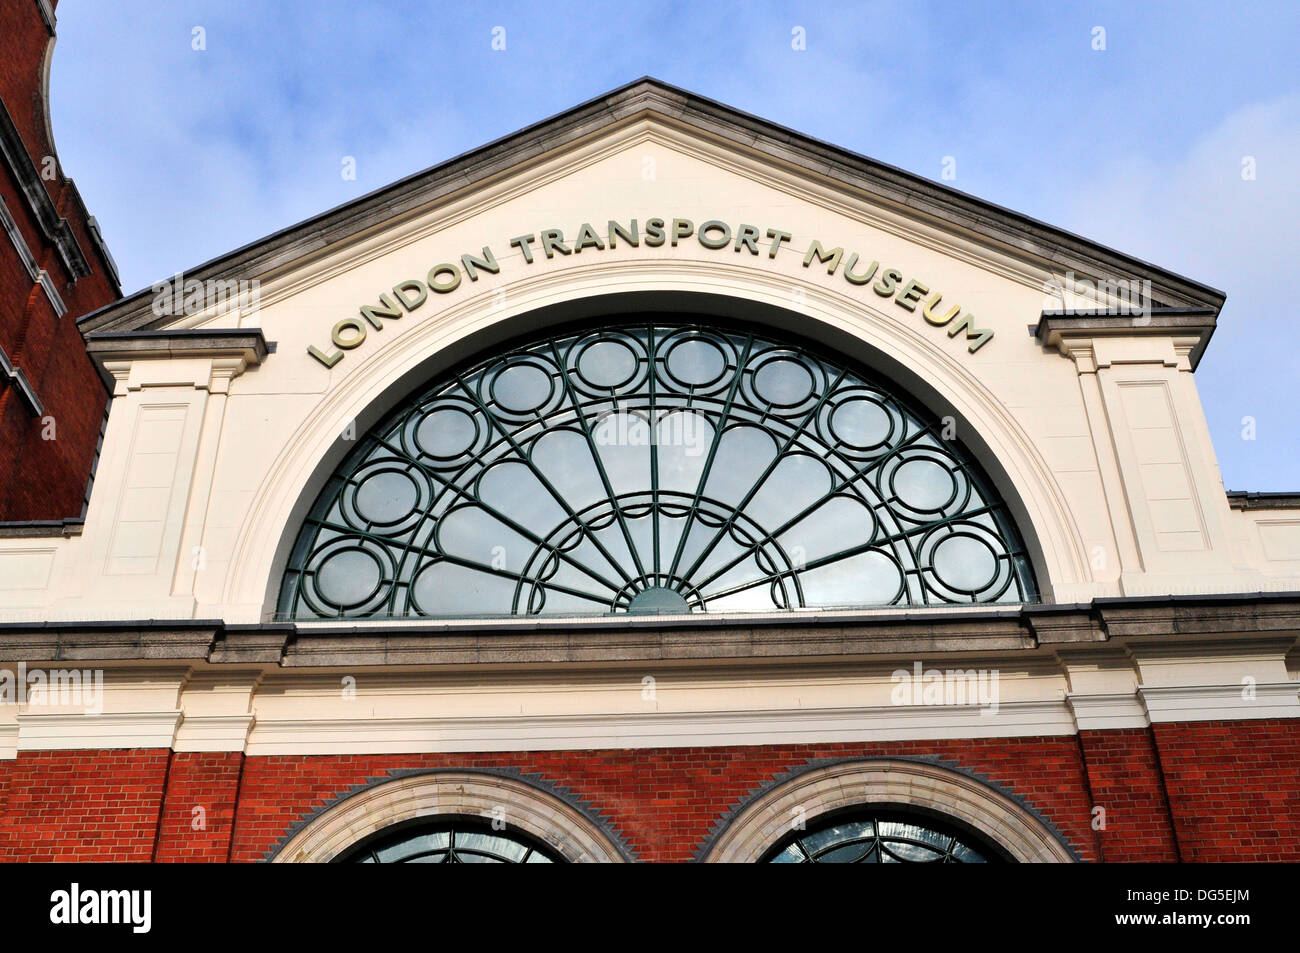 A close view of London transport museum, Covent Garden, UK Stock Photo